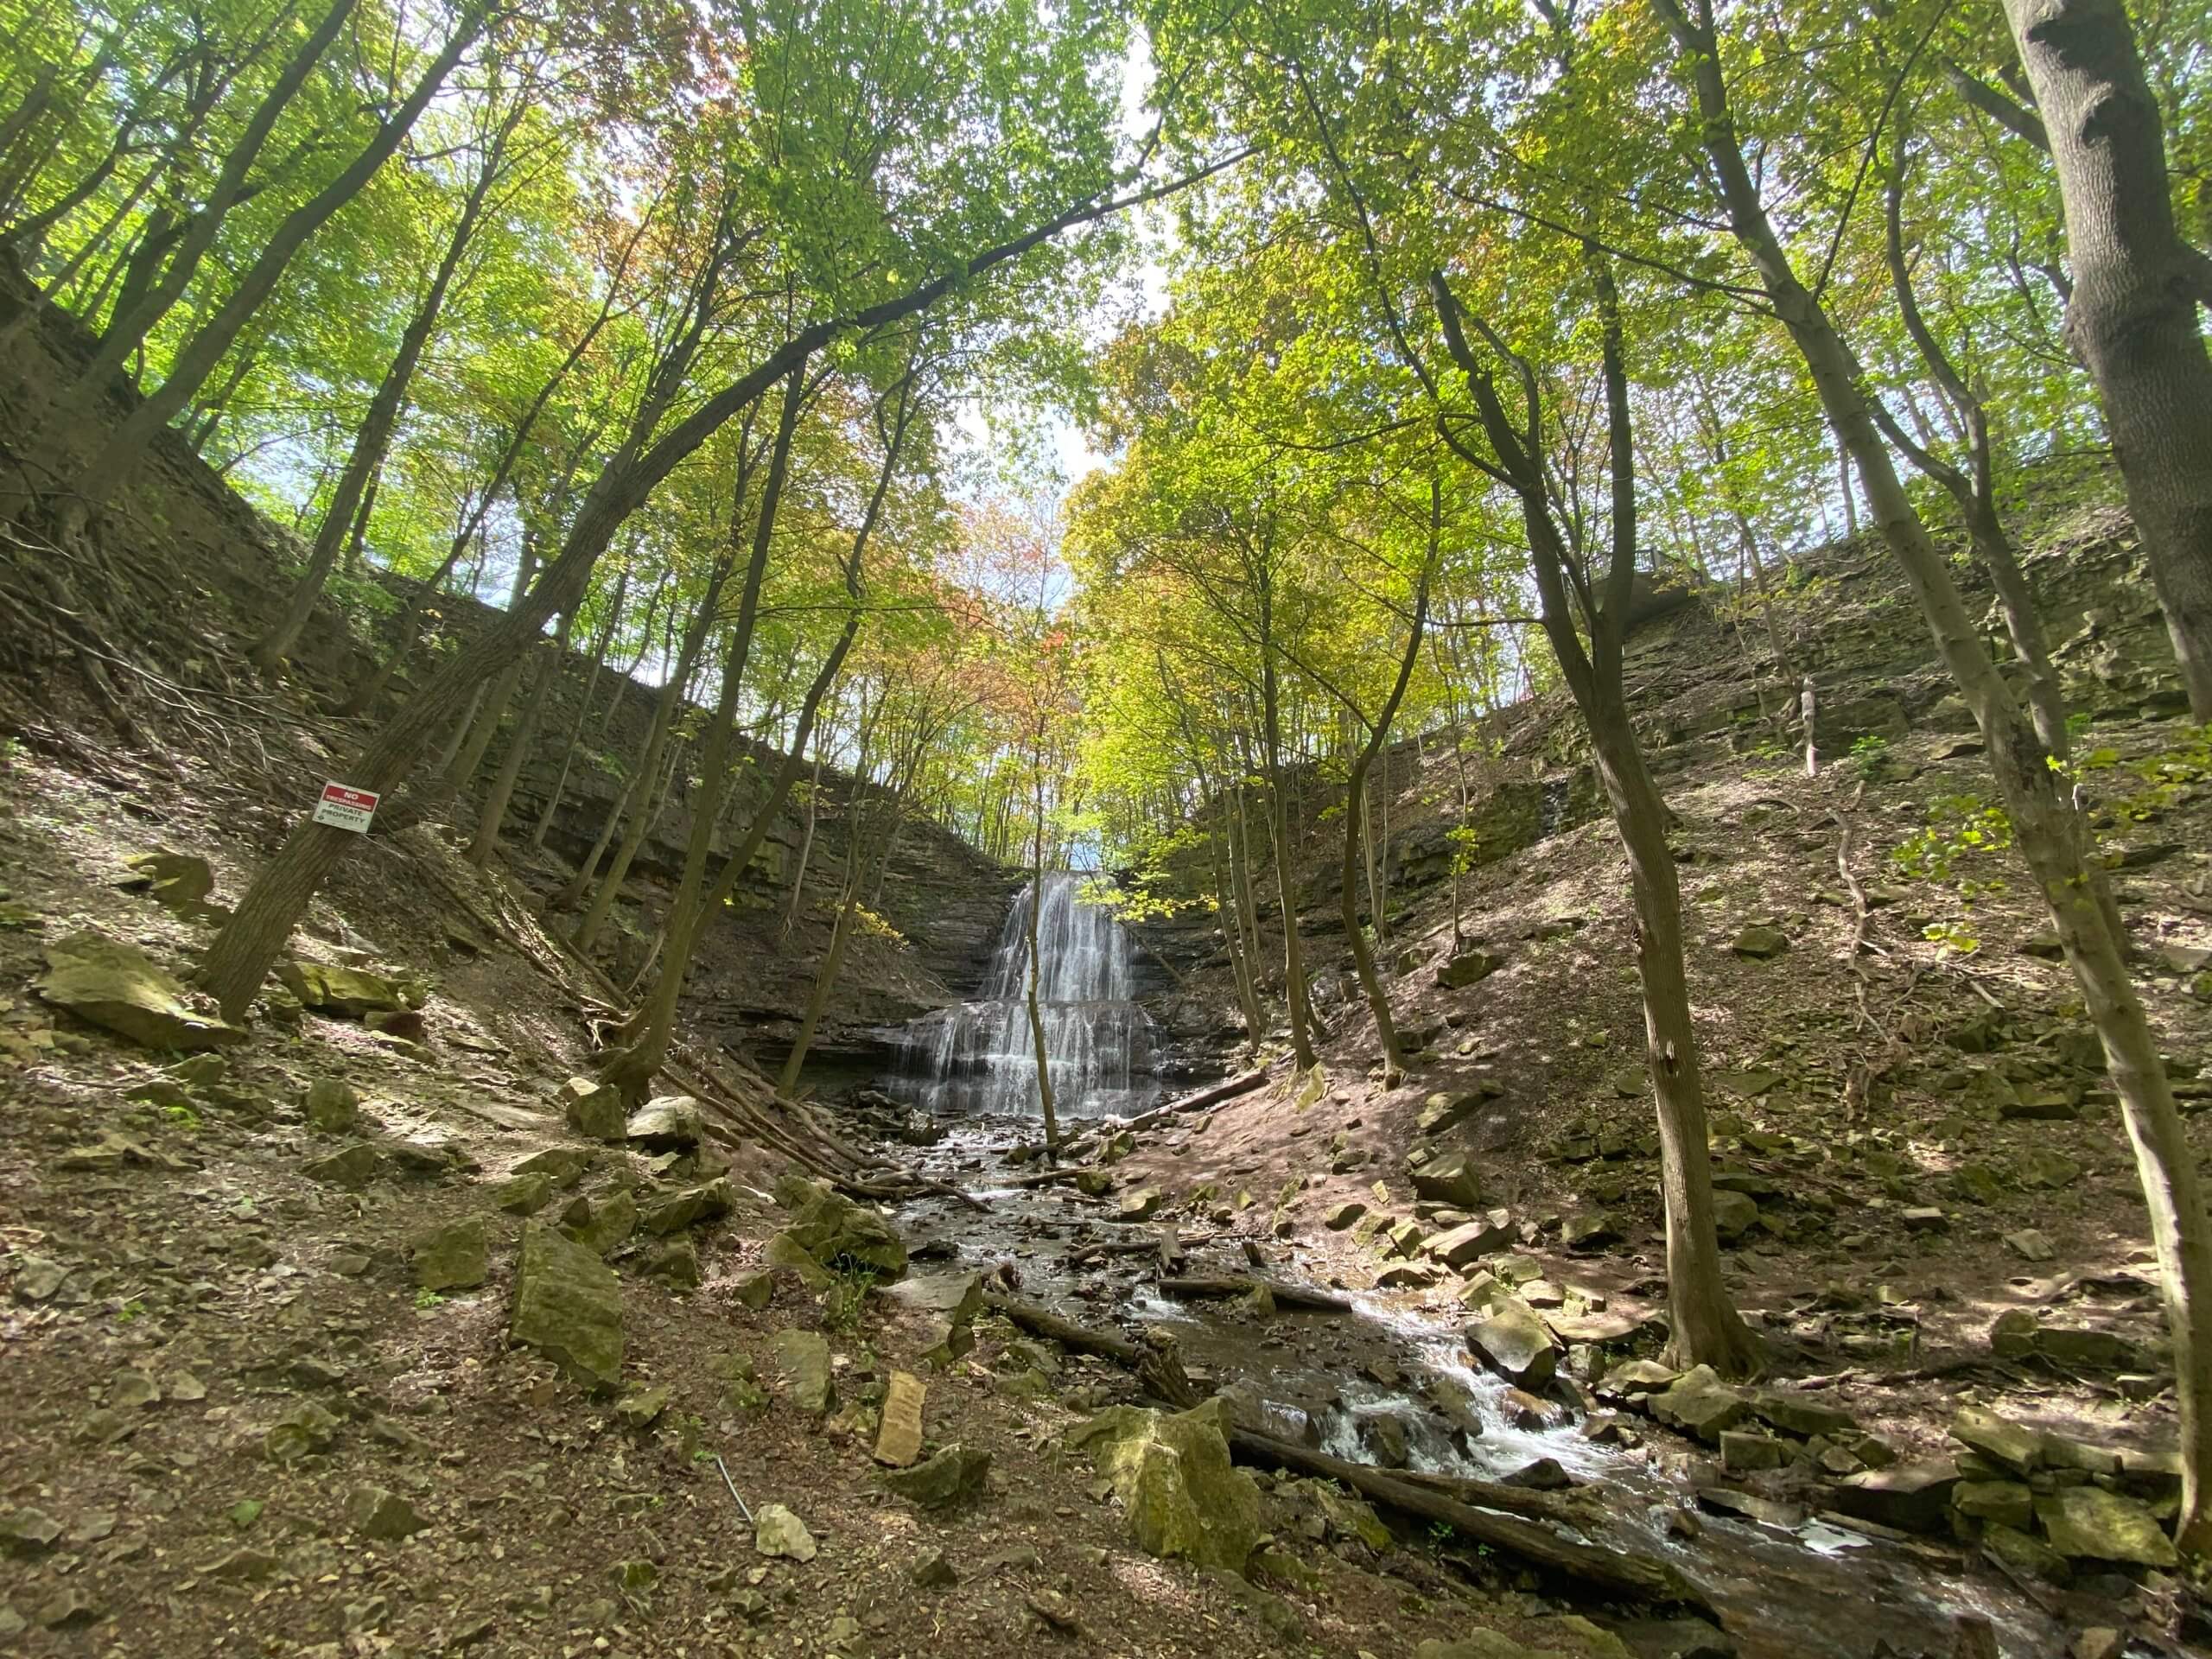 Guide To Hiking Ontario’s Bruce Trail